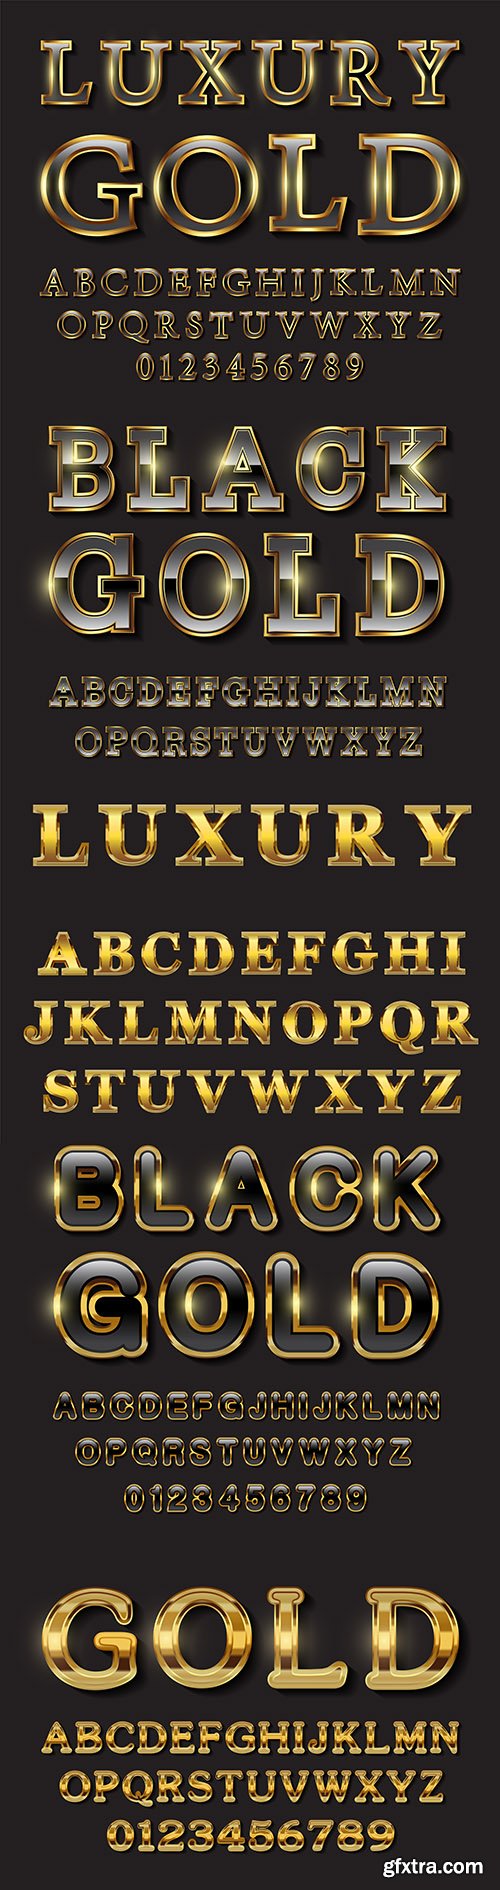 Black font and alphabet with gold stroke text effect